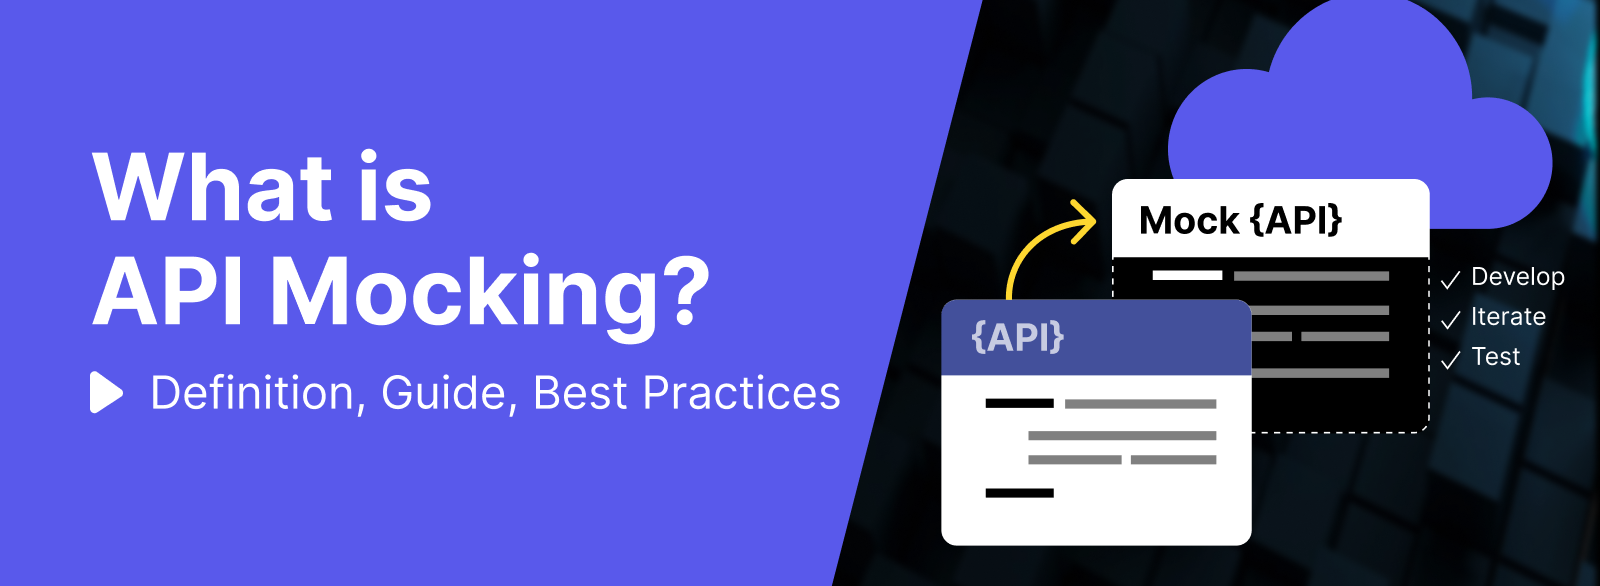 What is API Mocking? Definition, Guide, and Best Practices